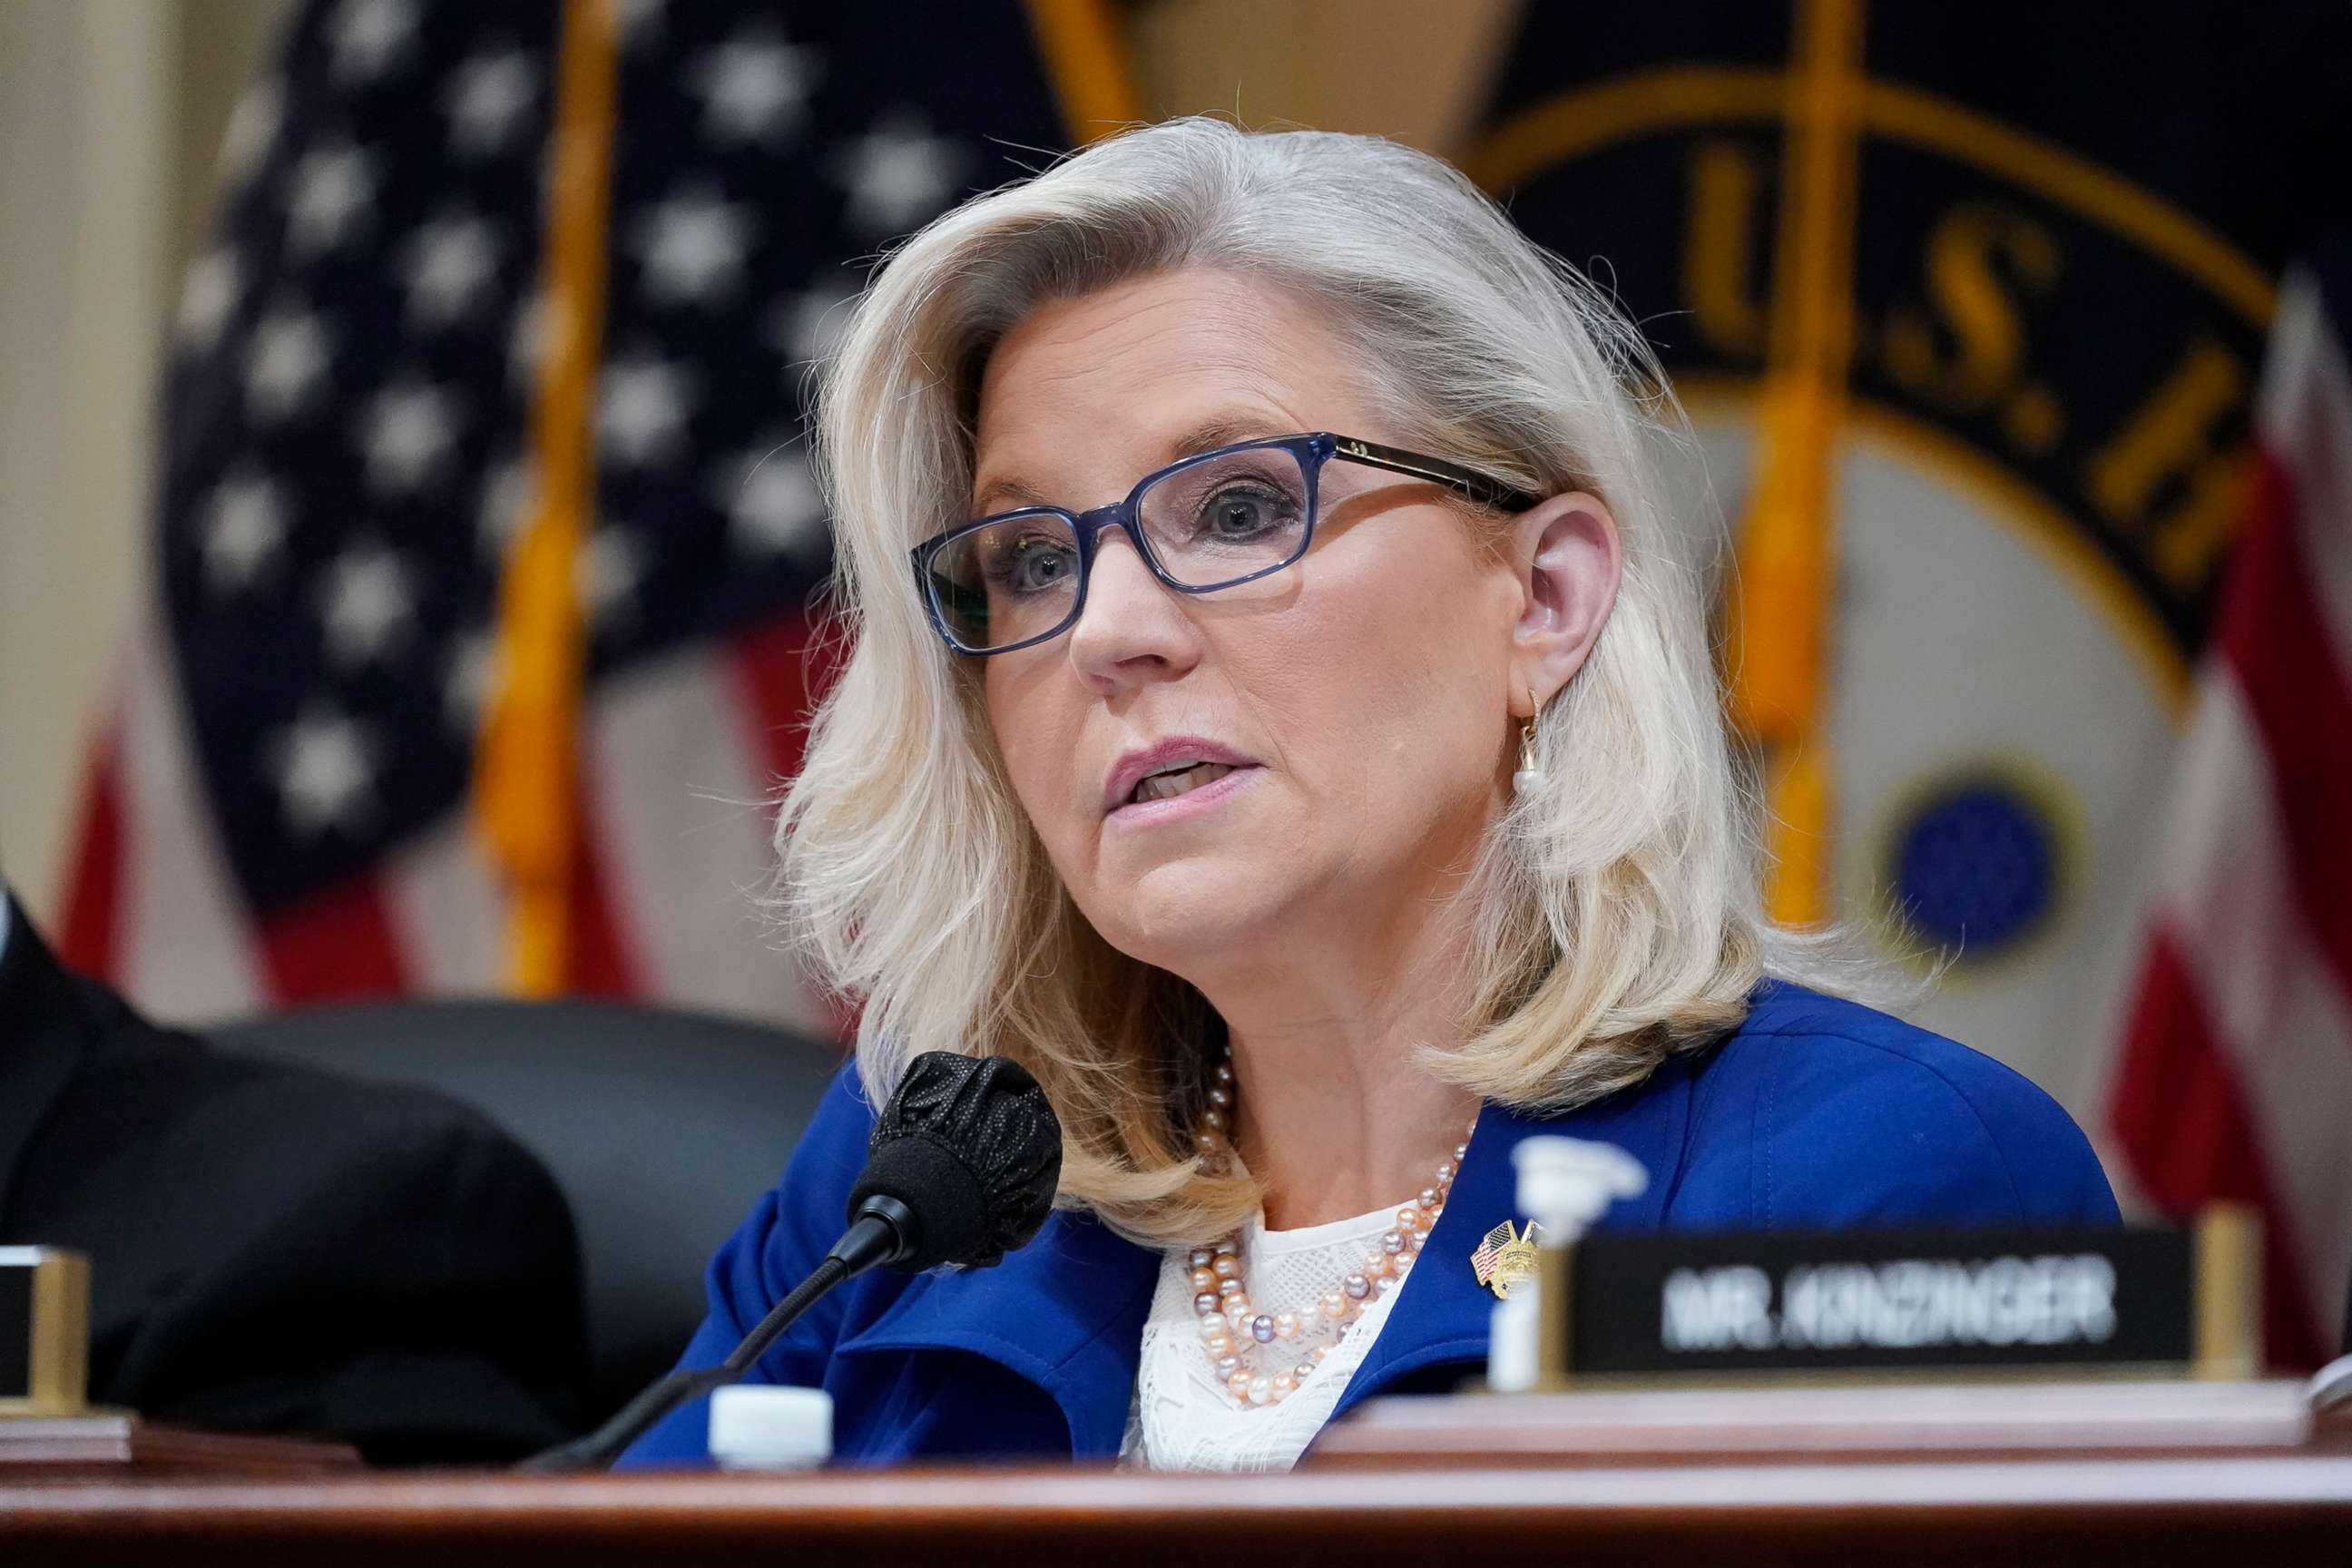 PHOTO: Vice Chair Liz Cheney speaks as the House select committee investigating the Jan. 6 attack on the U.S. Capitol, holds a hearing on Capitol Hill in Washington, D.C., on Oct. 13, 2022.